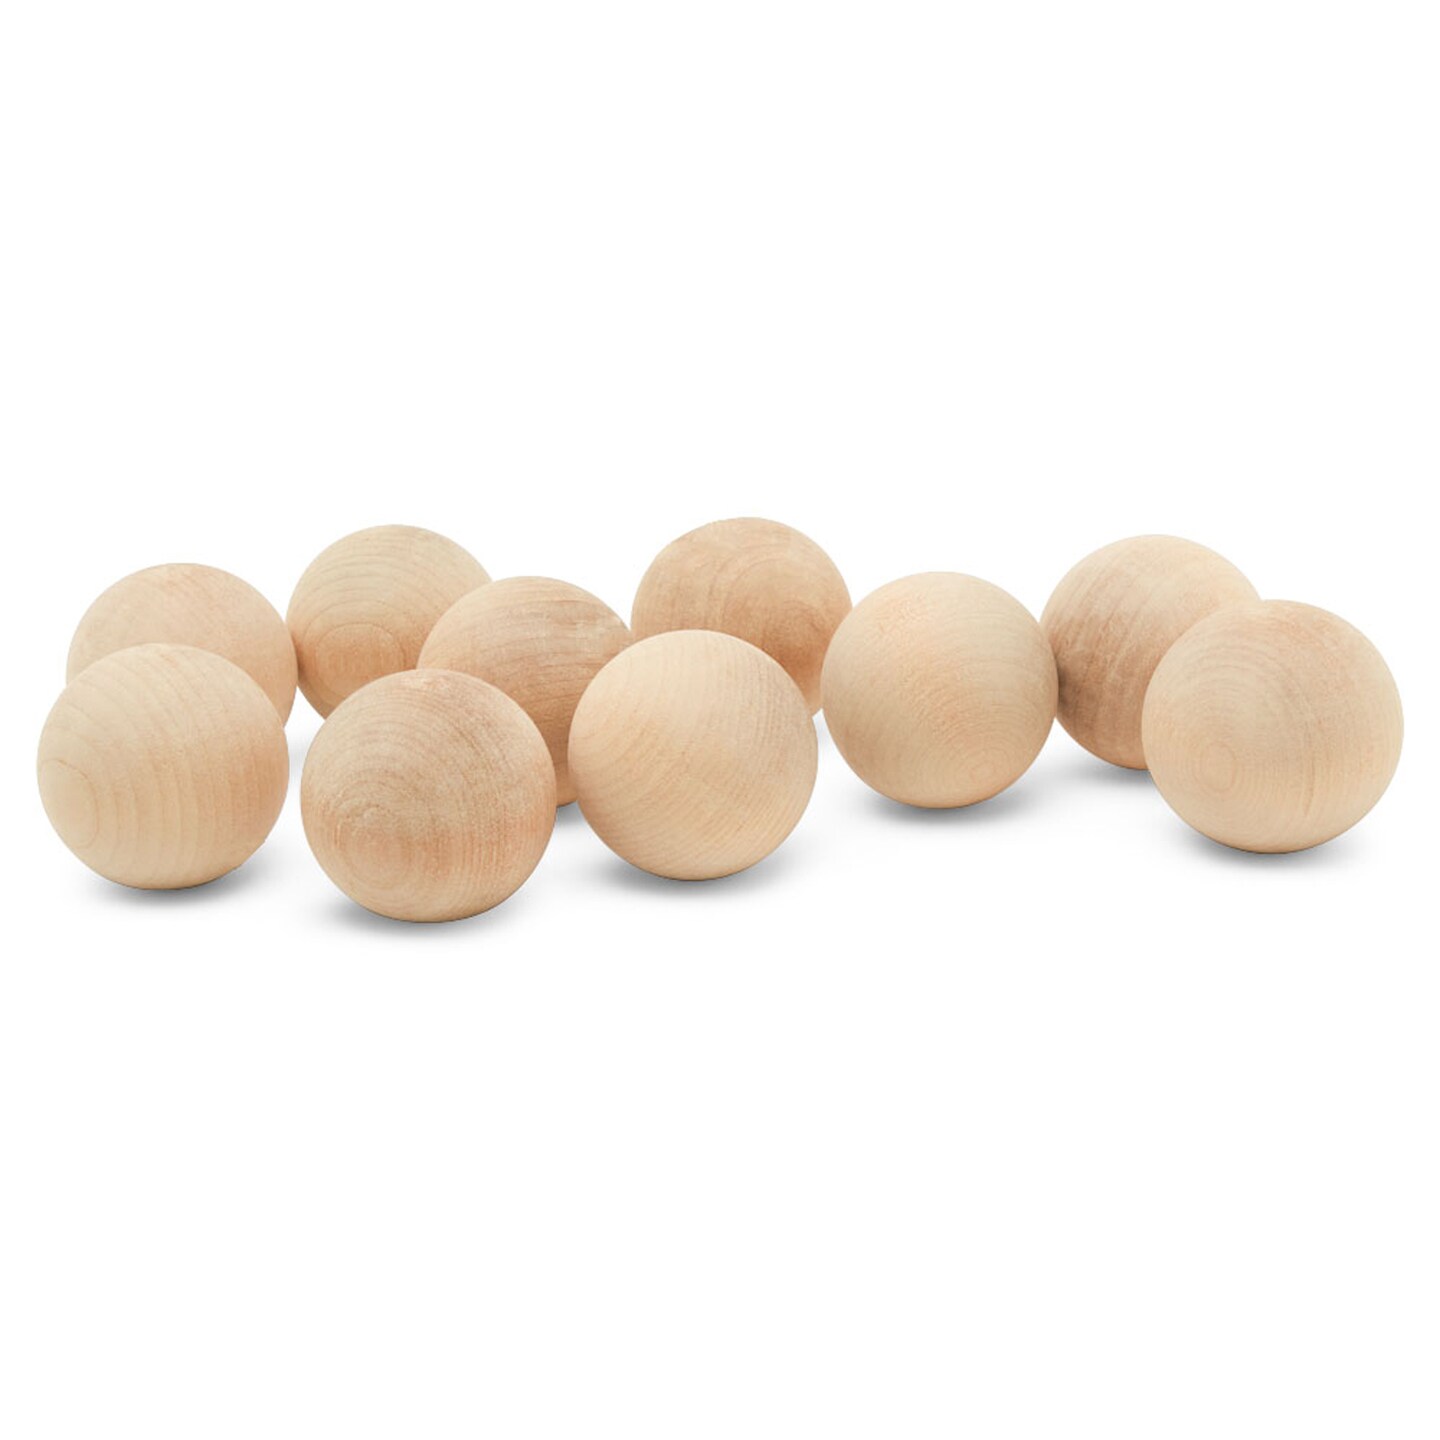 Wooden Balls for Crafts, Unfinished Round Wood Balls, 1/2 Inch Diameter Wooden  Balls, for Crafts and DIY Projects, Small Wooden Balls 